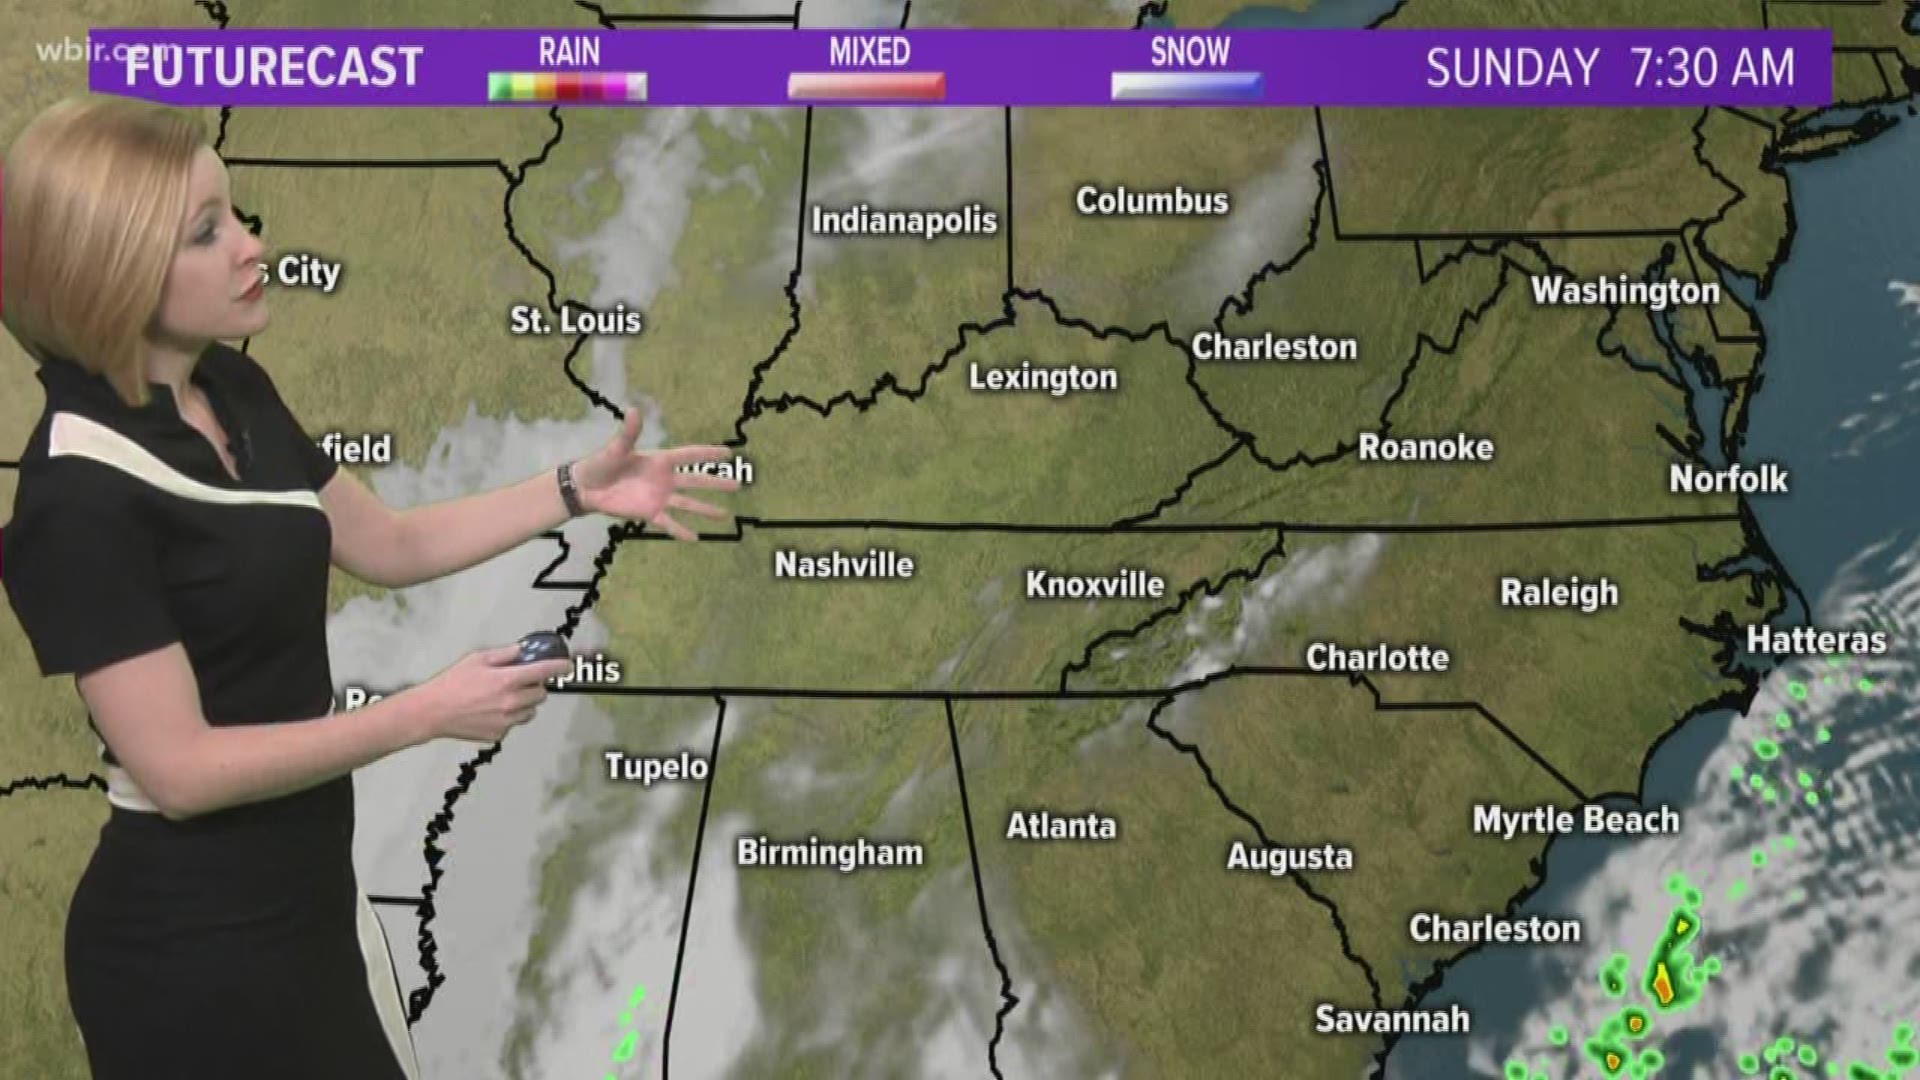 Rain chances return on Monday with cooler temps moving in on Tuesday